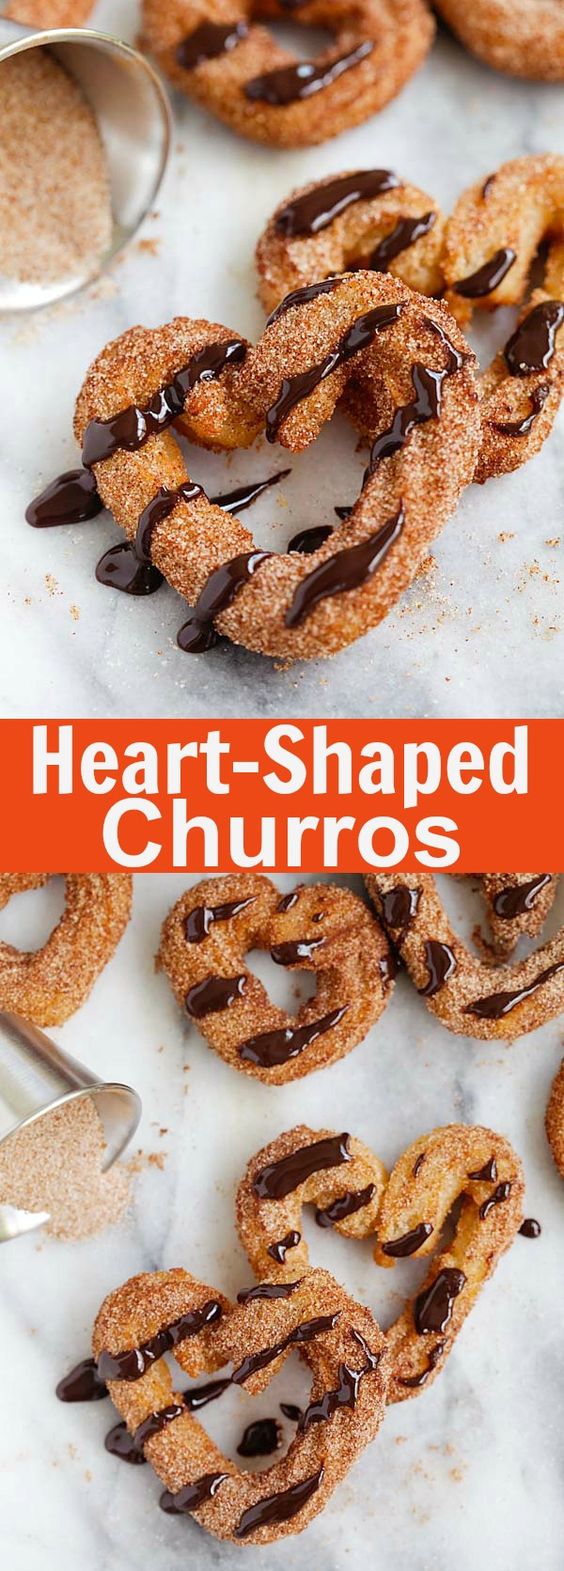 This churros recipe is so quick and easy to make, you may want the sweet treat every day! Pipe them, fry them,, then drizzle with chocolate for the perfect dessert. | rasamalaysia.com